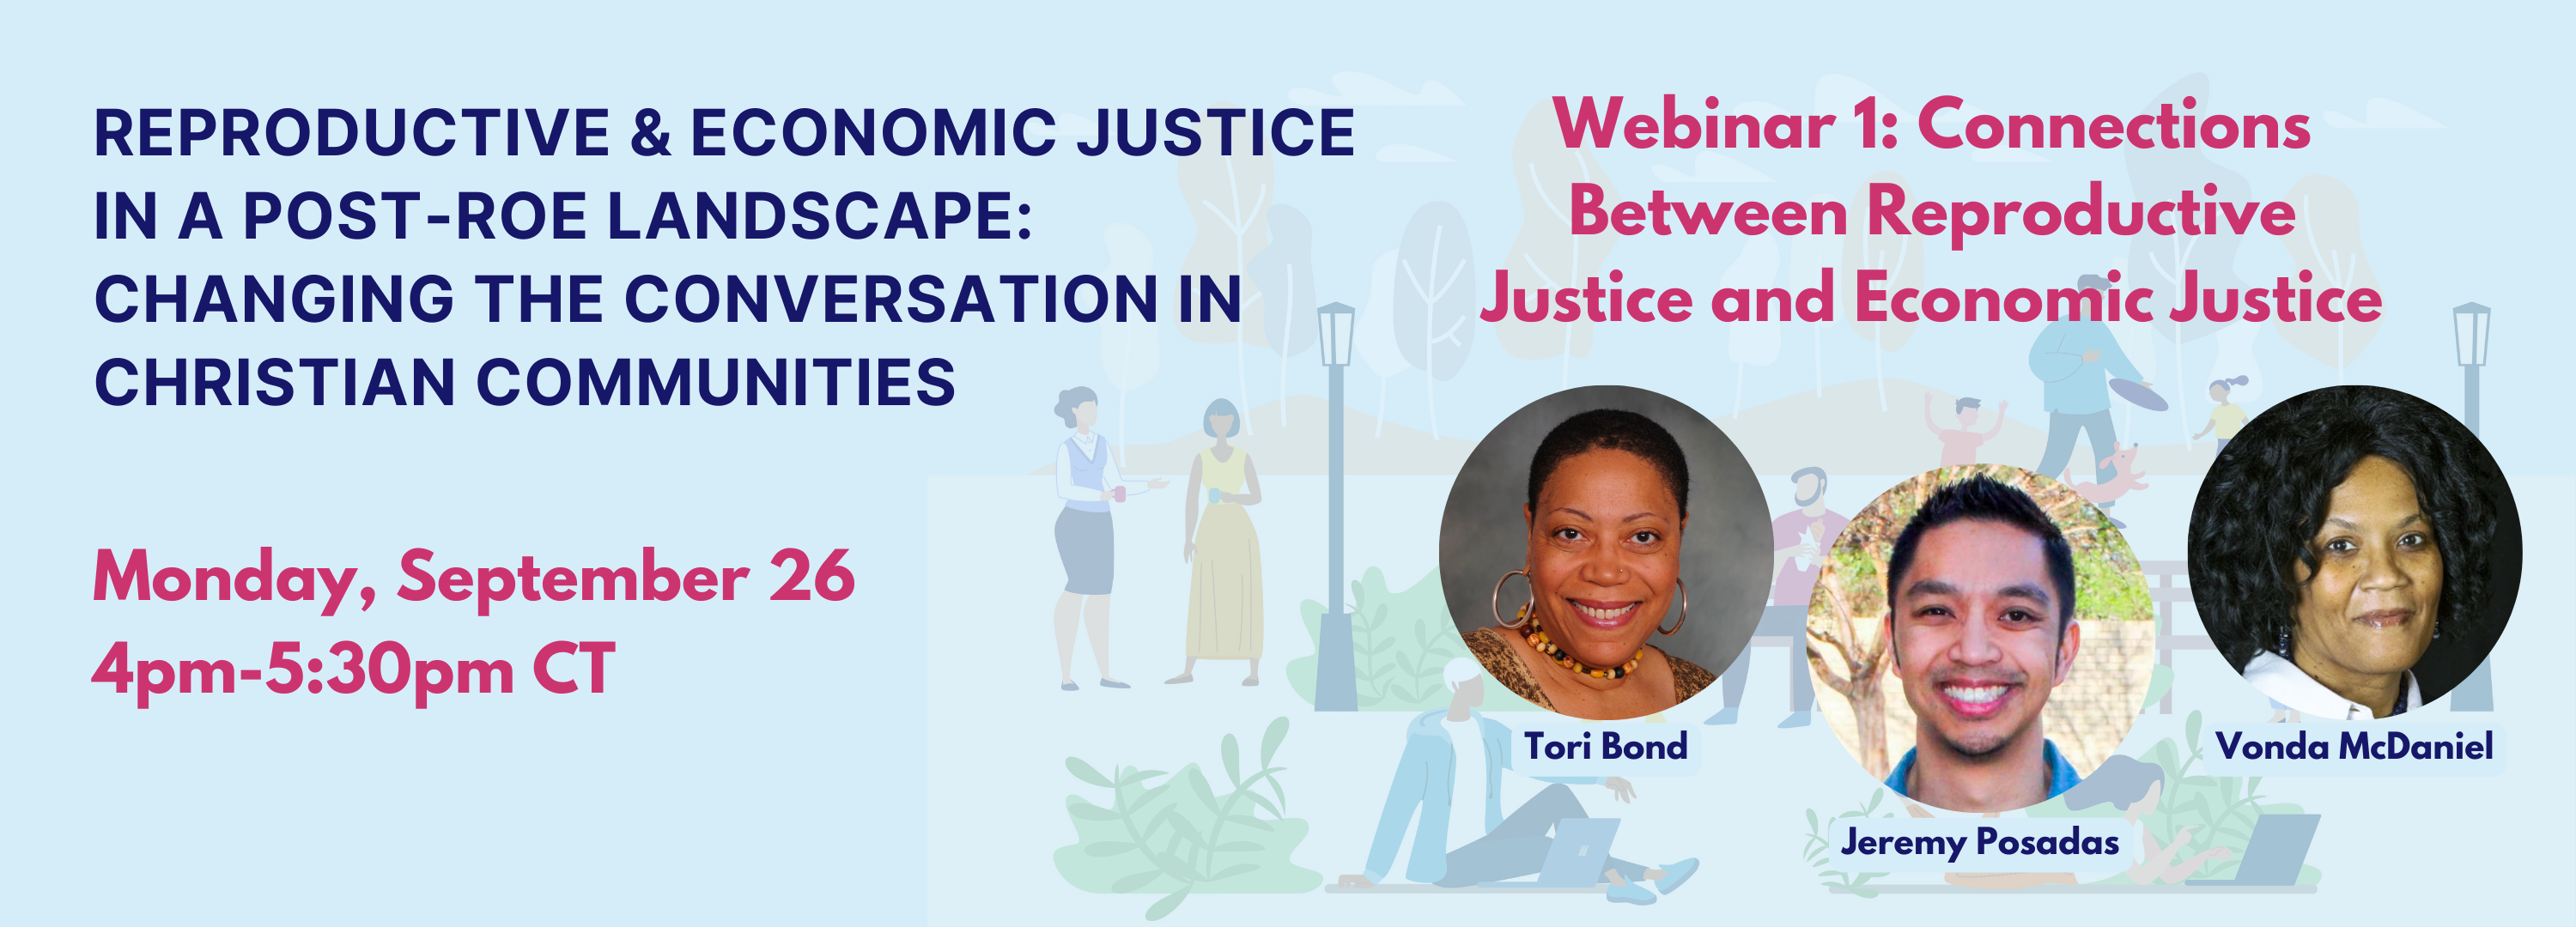 Reproductive & Economic Justice in a Post-Roe Landscape:  Changing the Conversation in Christian Communities